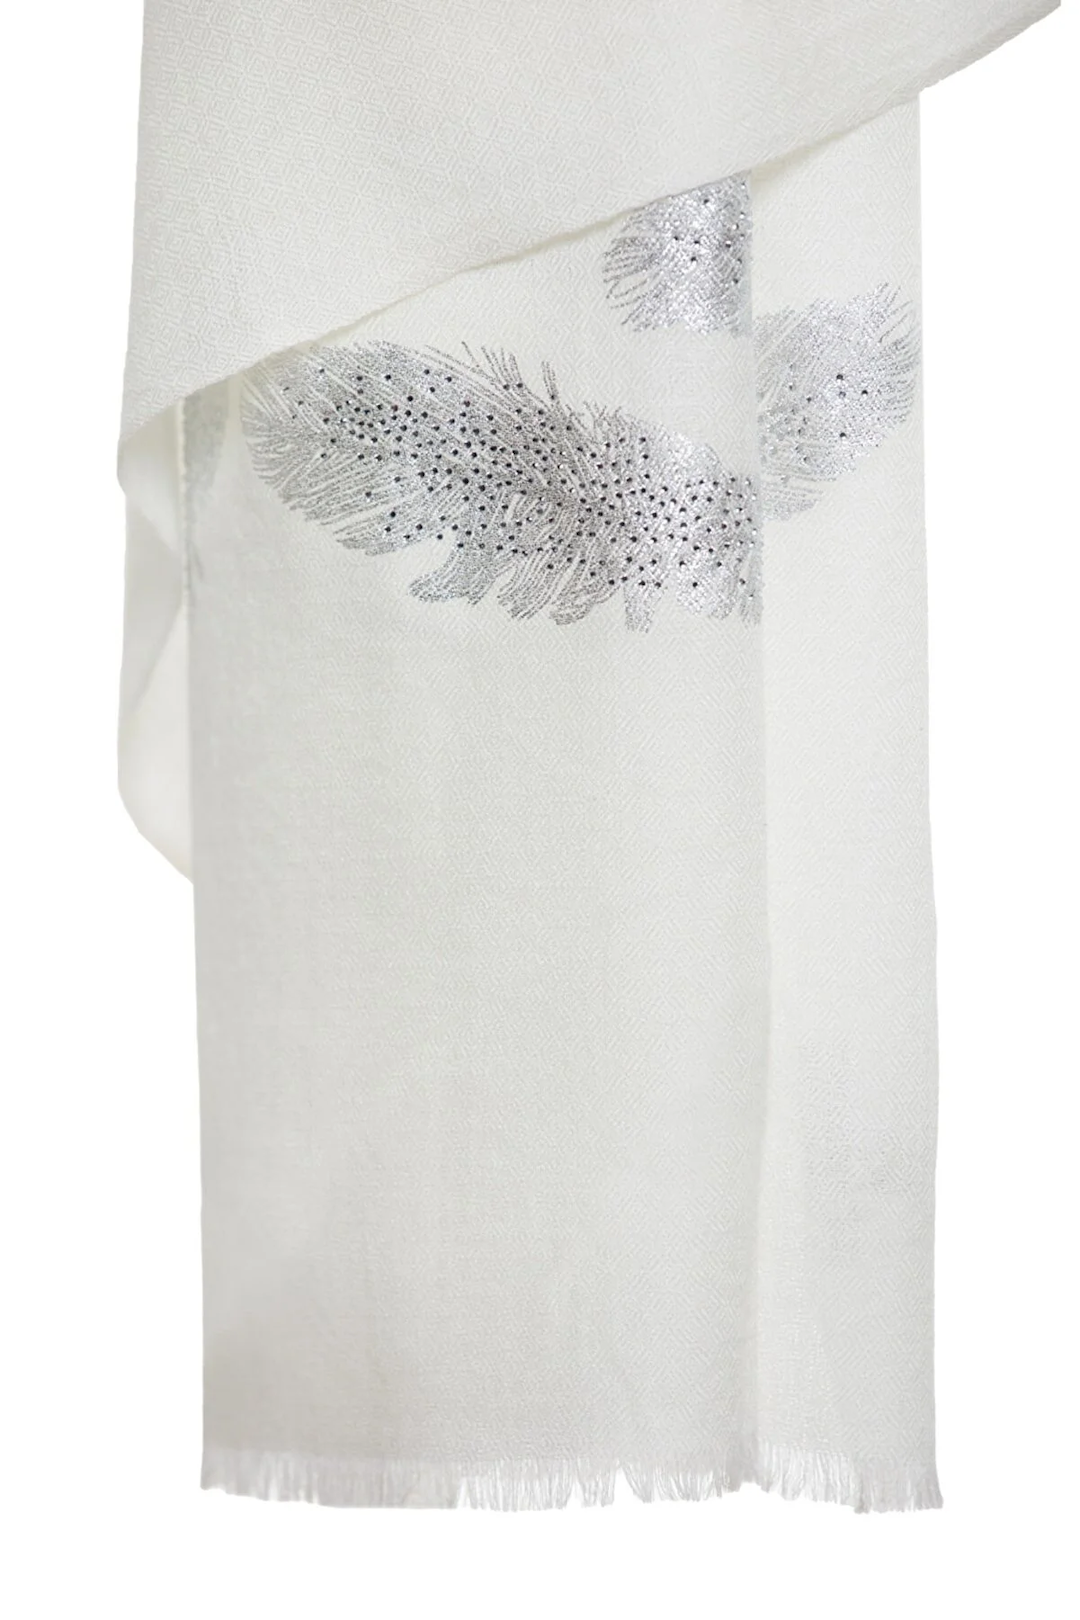 Angel Feathers Crystal Feathers Shawl Stole - Ivory Silver